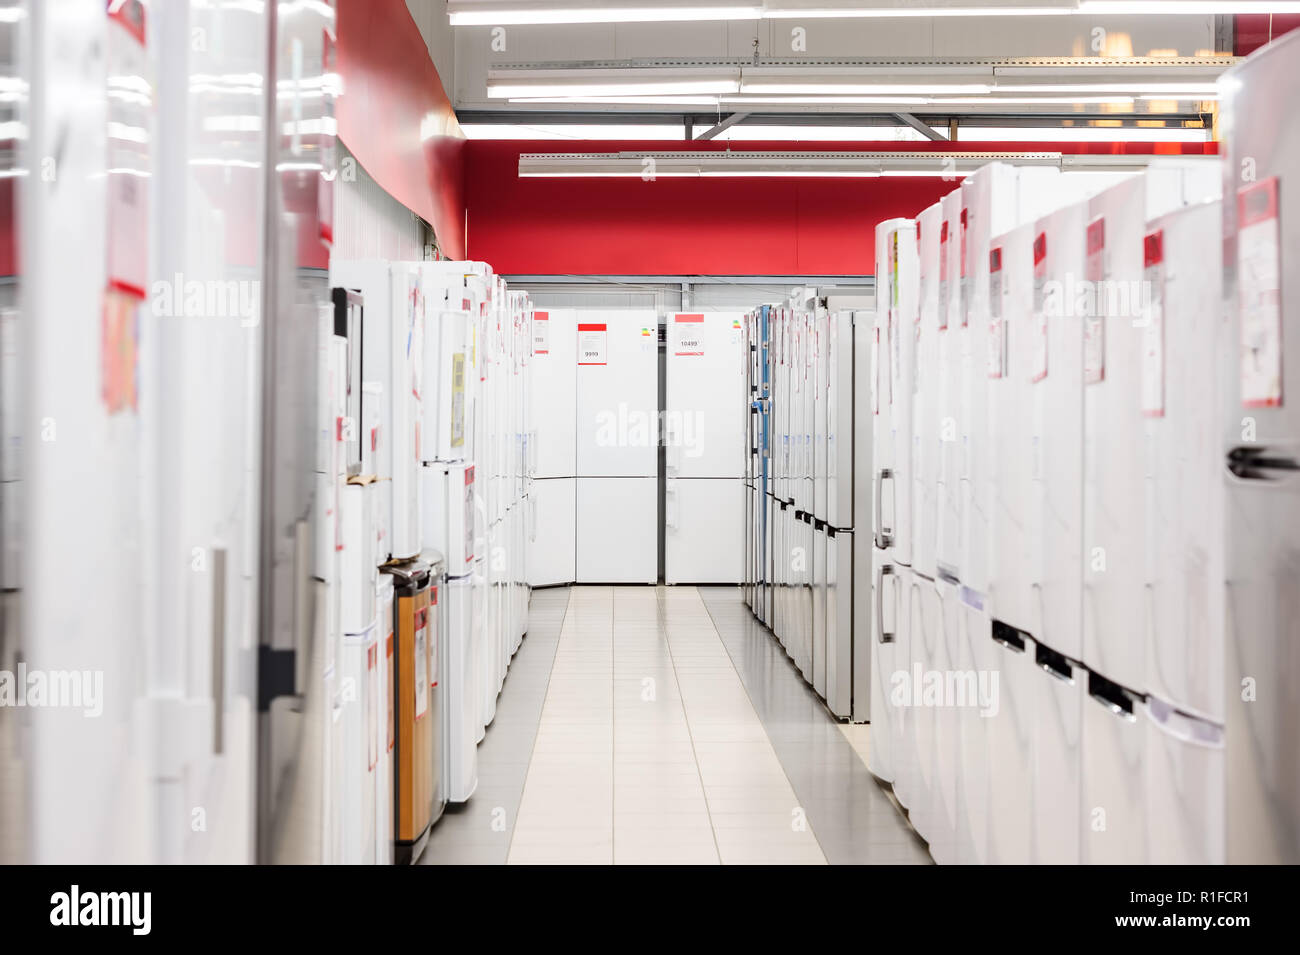 rows of refrigerators in appliance store Stock Photo